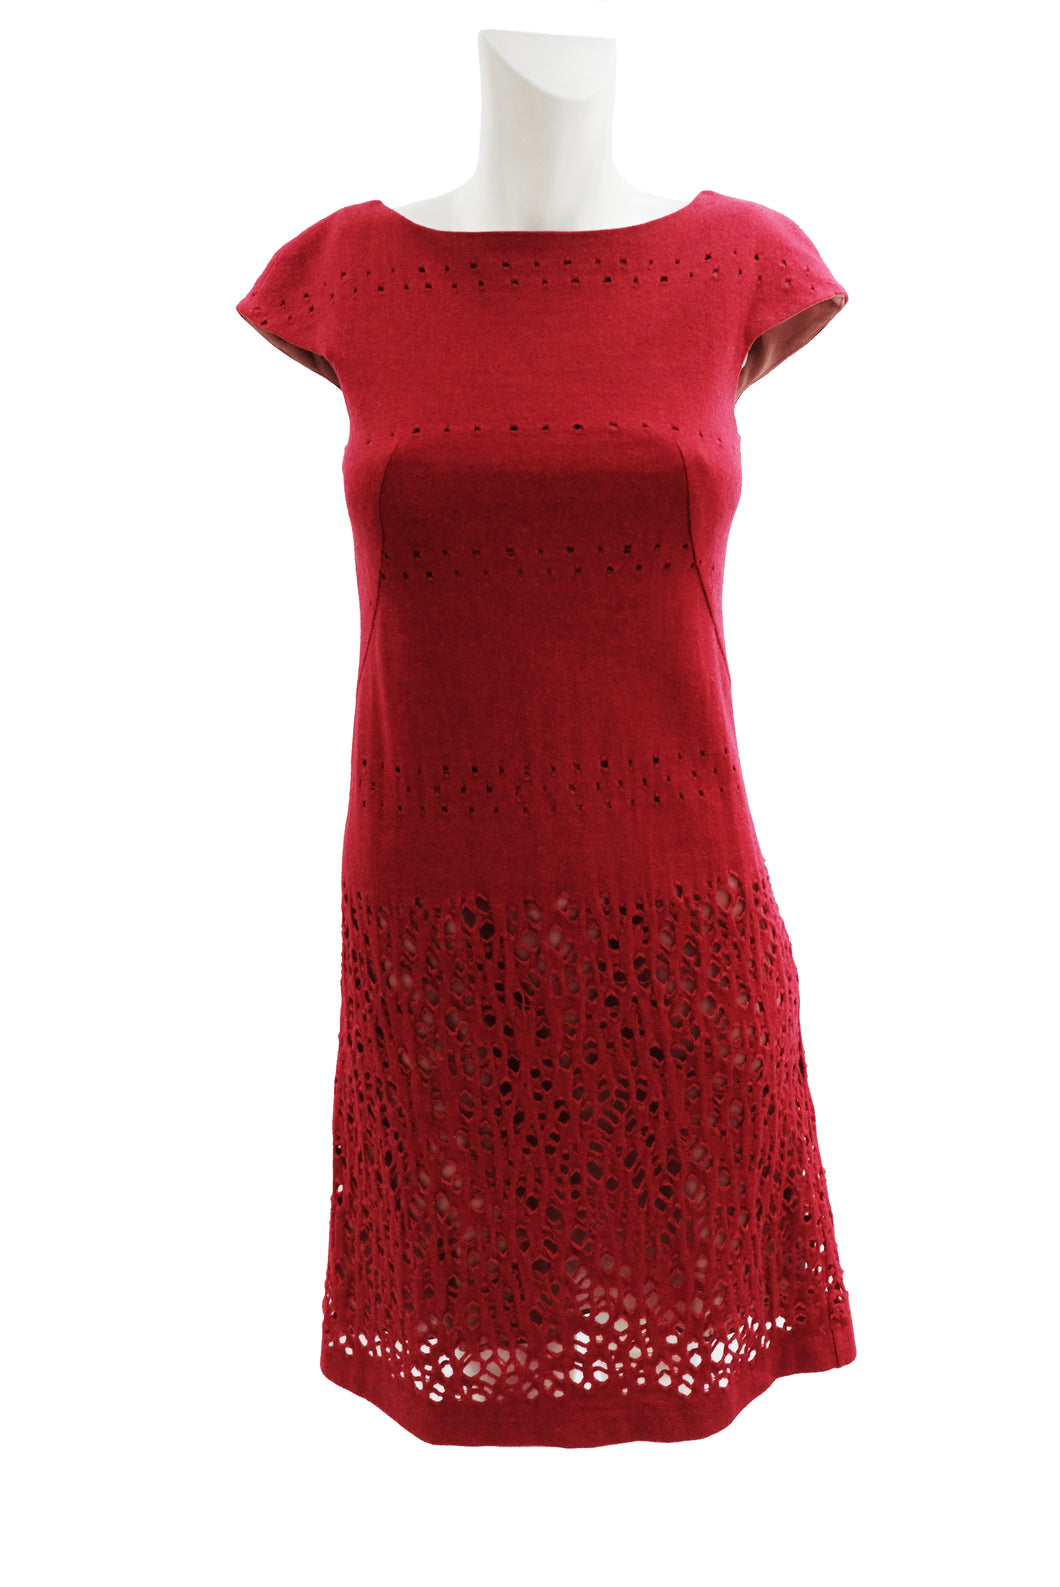 Sybilla Vintage Cut Out Shift Dress in Cherry Red Wool,  UK8-10